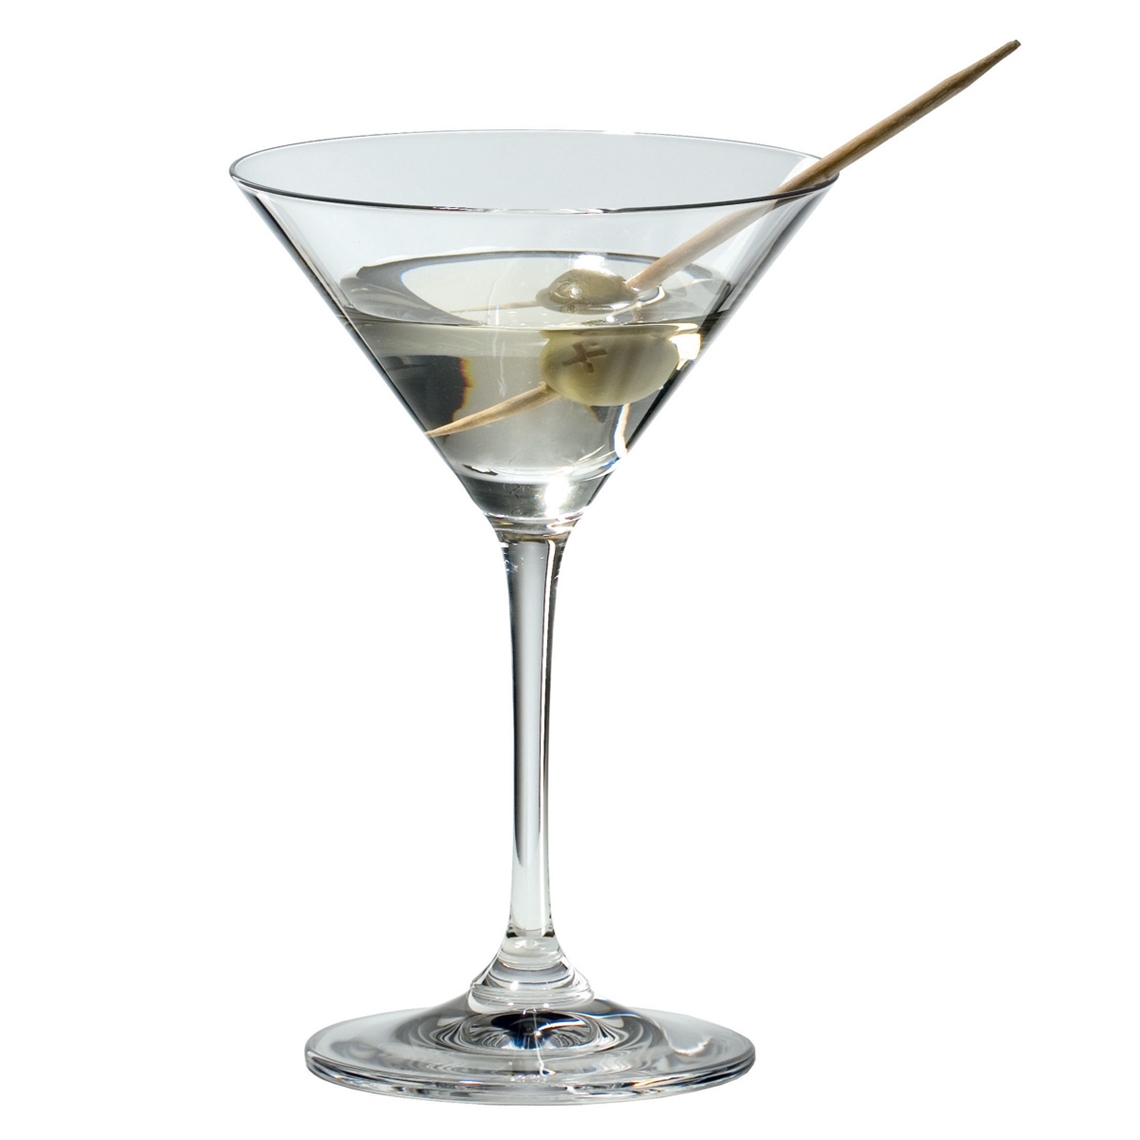 View more ivento from our Martini Glasses range